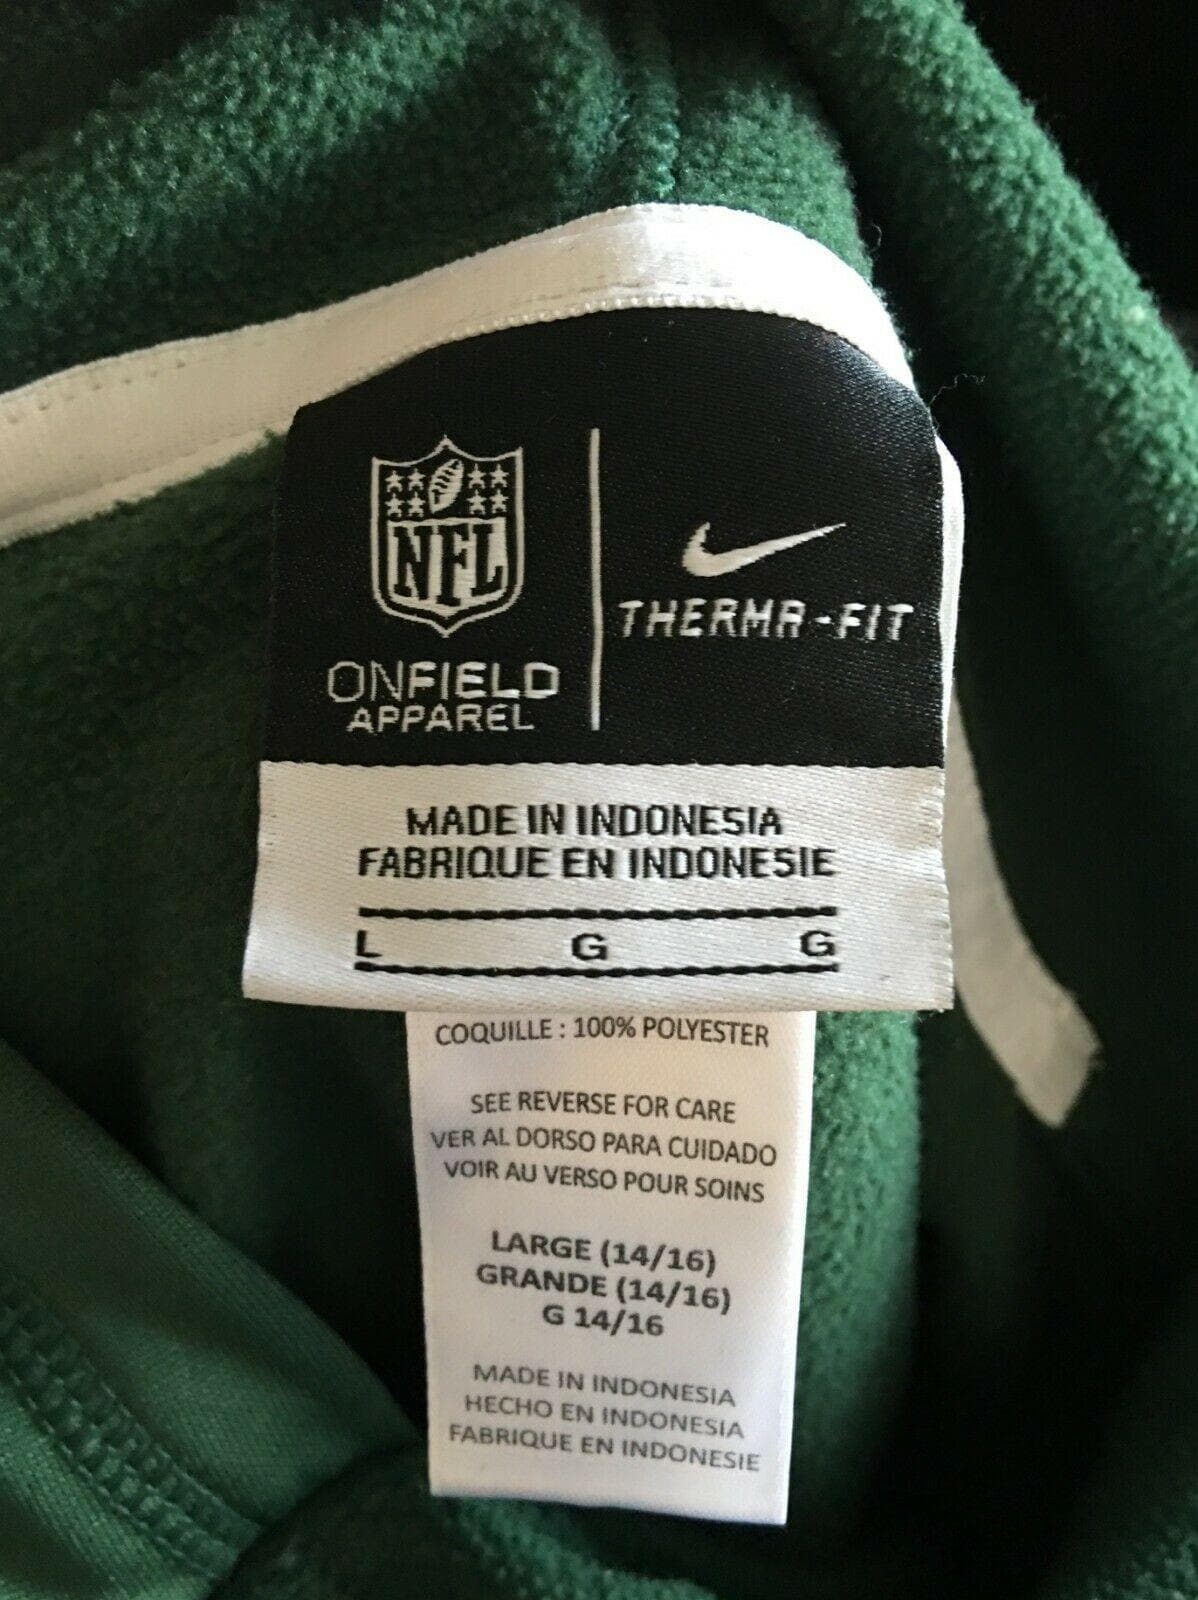 NFL New York Jets Insulated Hoodie Youth Large 14-16